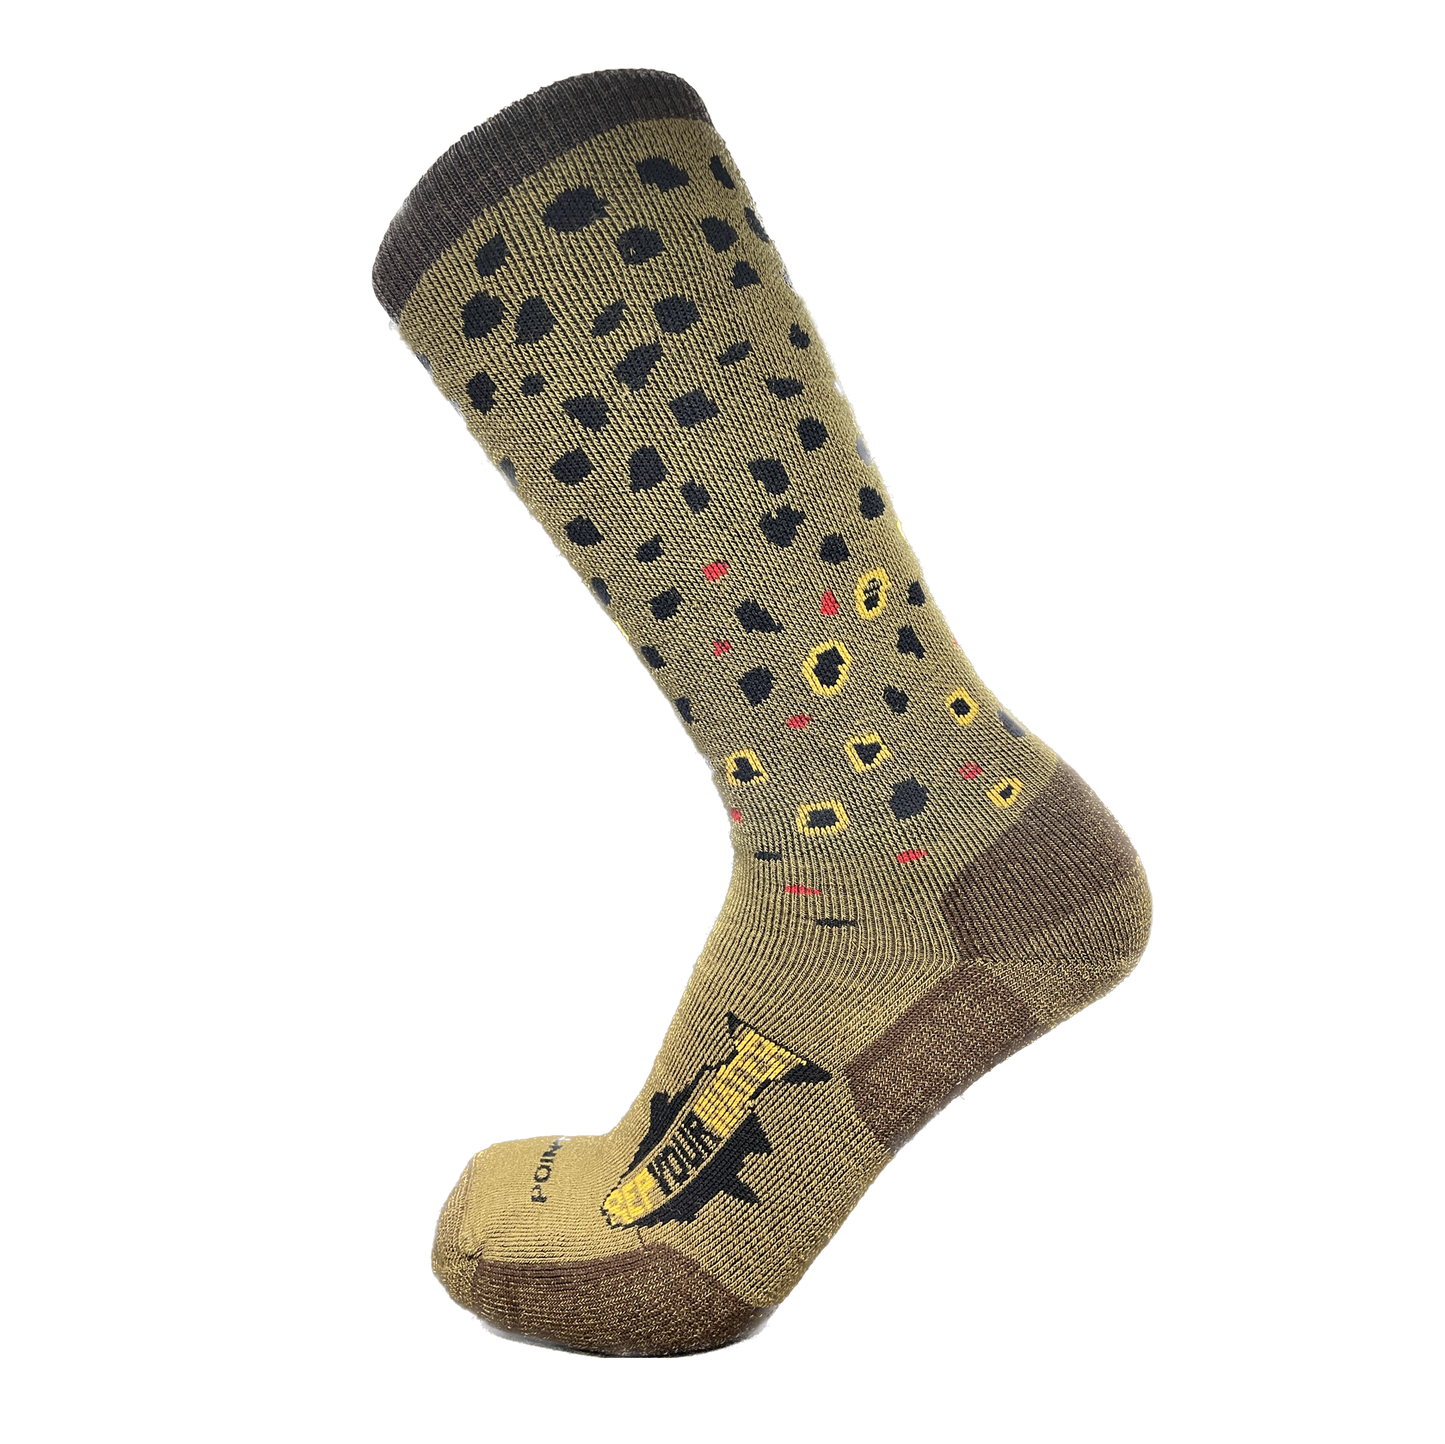 A sock with the pattern of a brown trout also has a logo on the foot that reads repyourwater in a trout silhouette